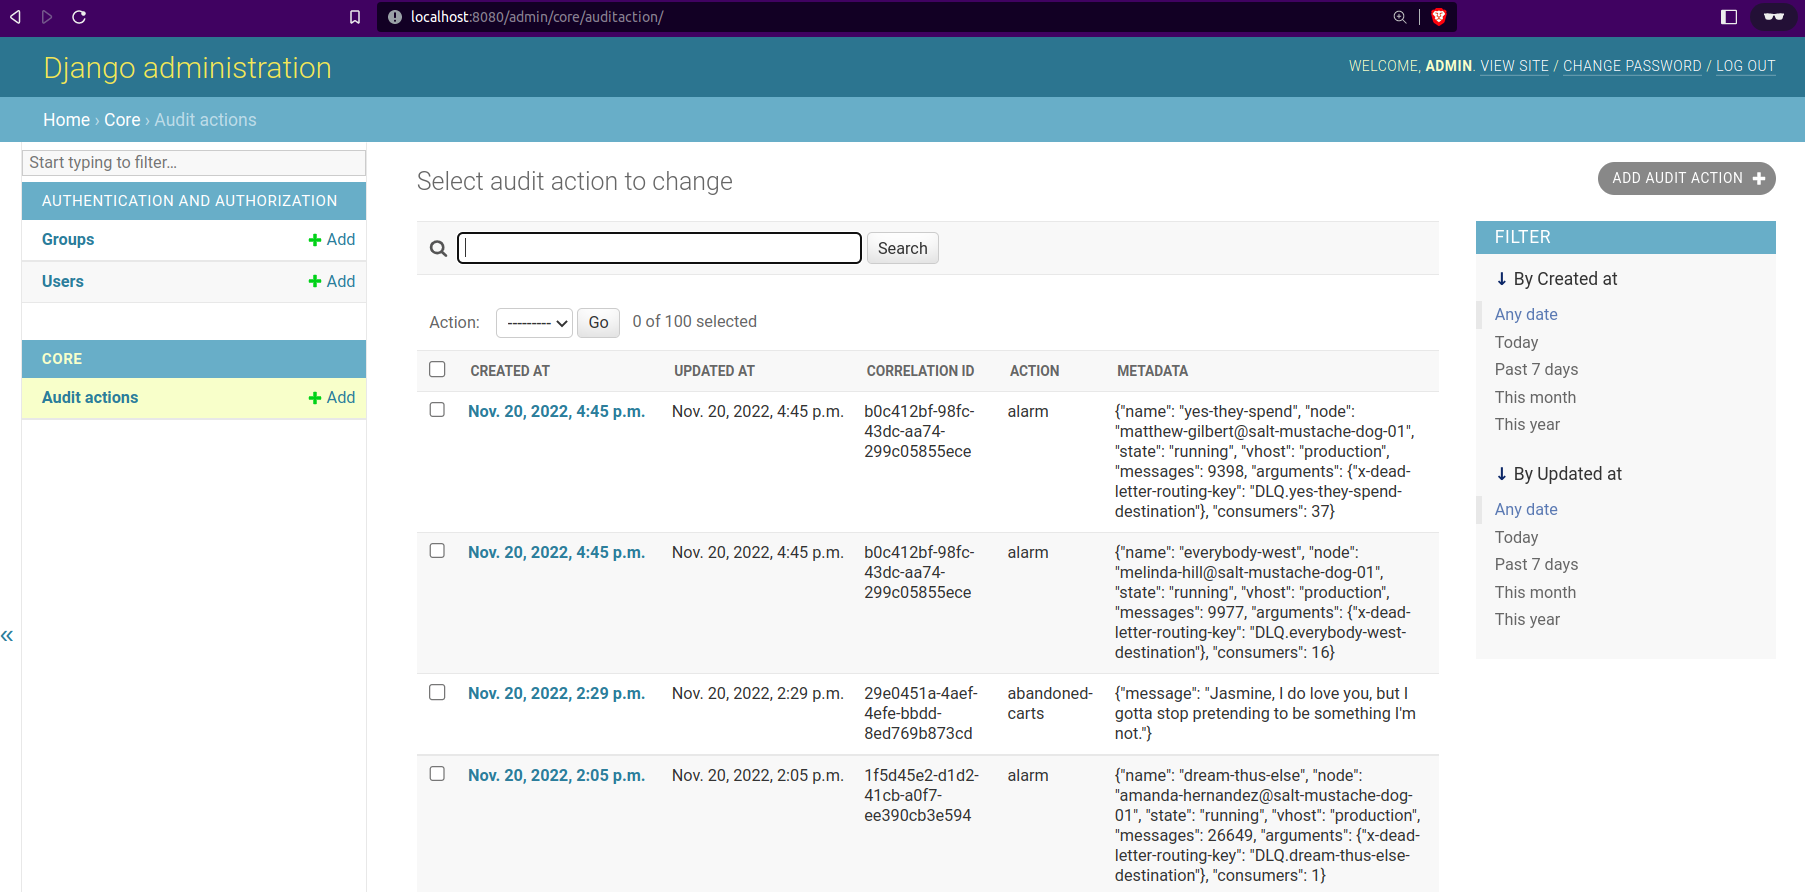 The admin is on audit actions page. It shows many records created through the workflow.